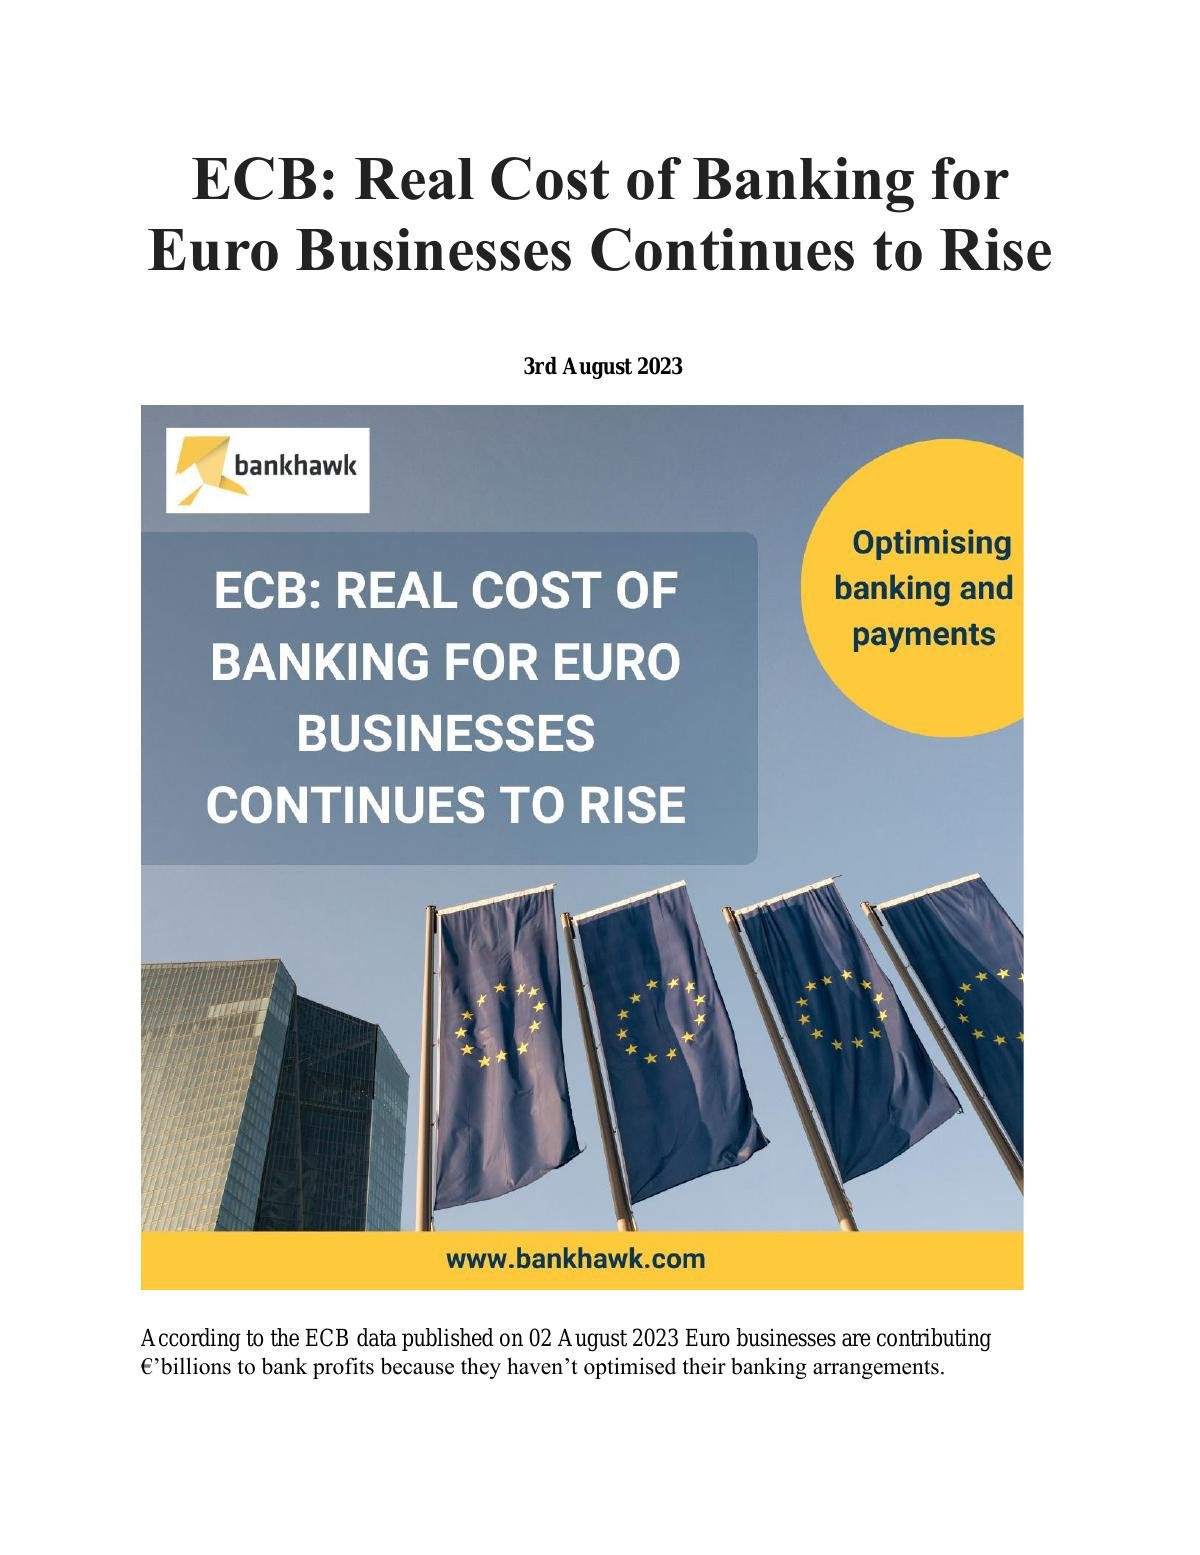 ECB:  Real Cost of Banking for Euro Business Continues to Rise